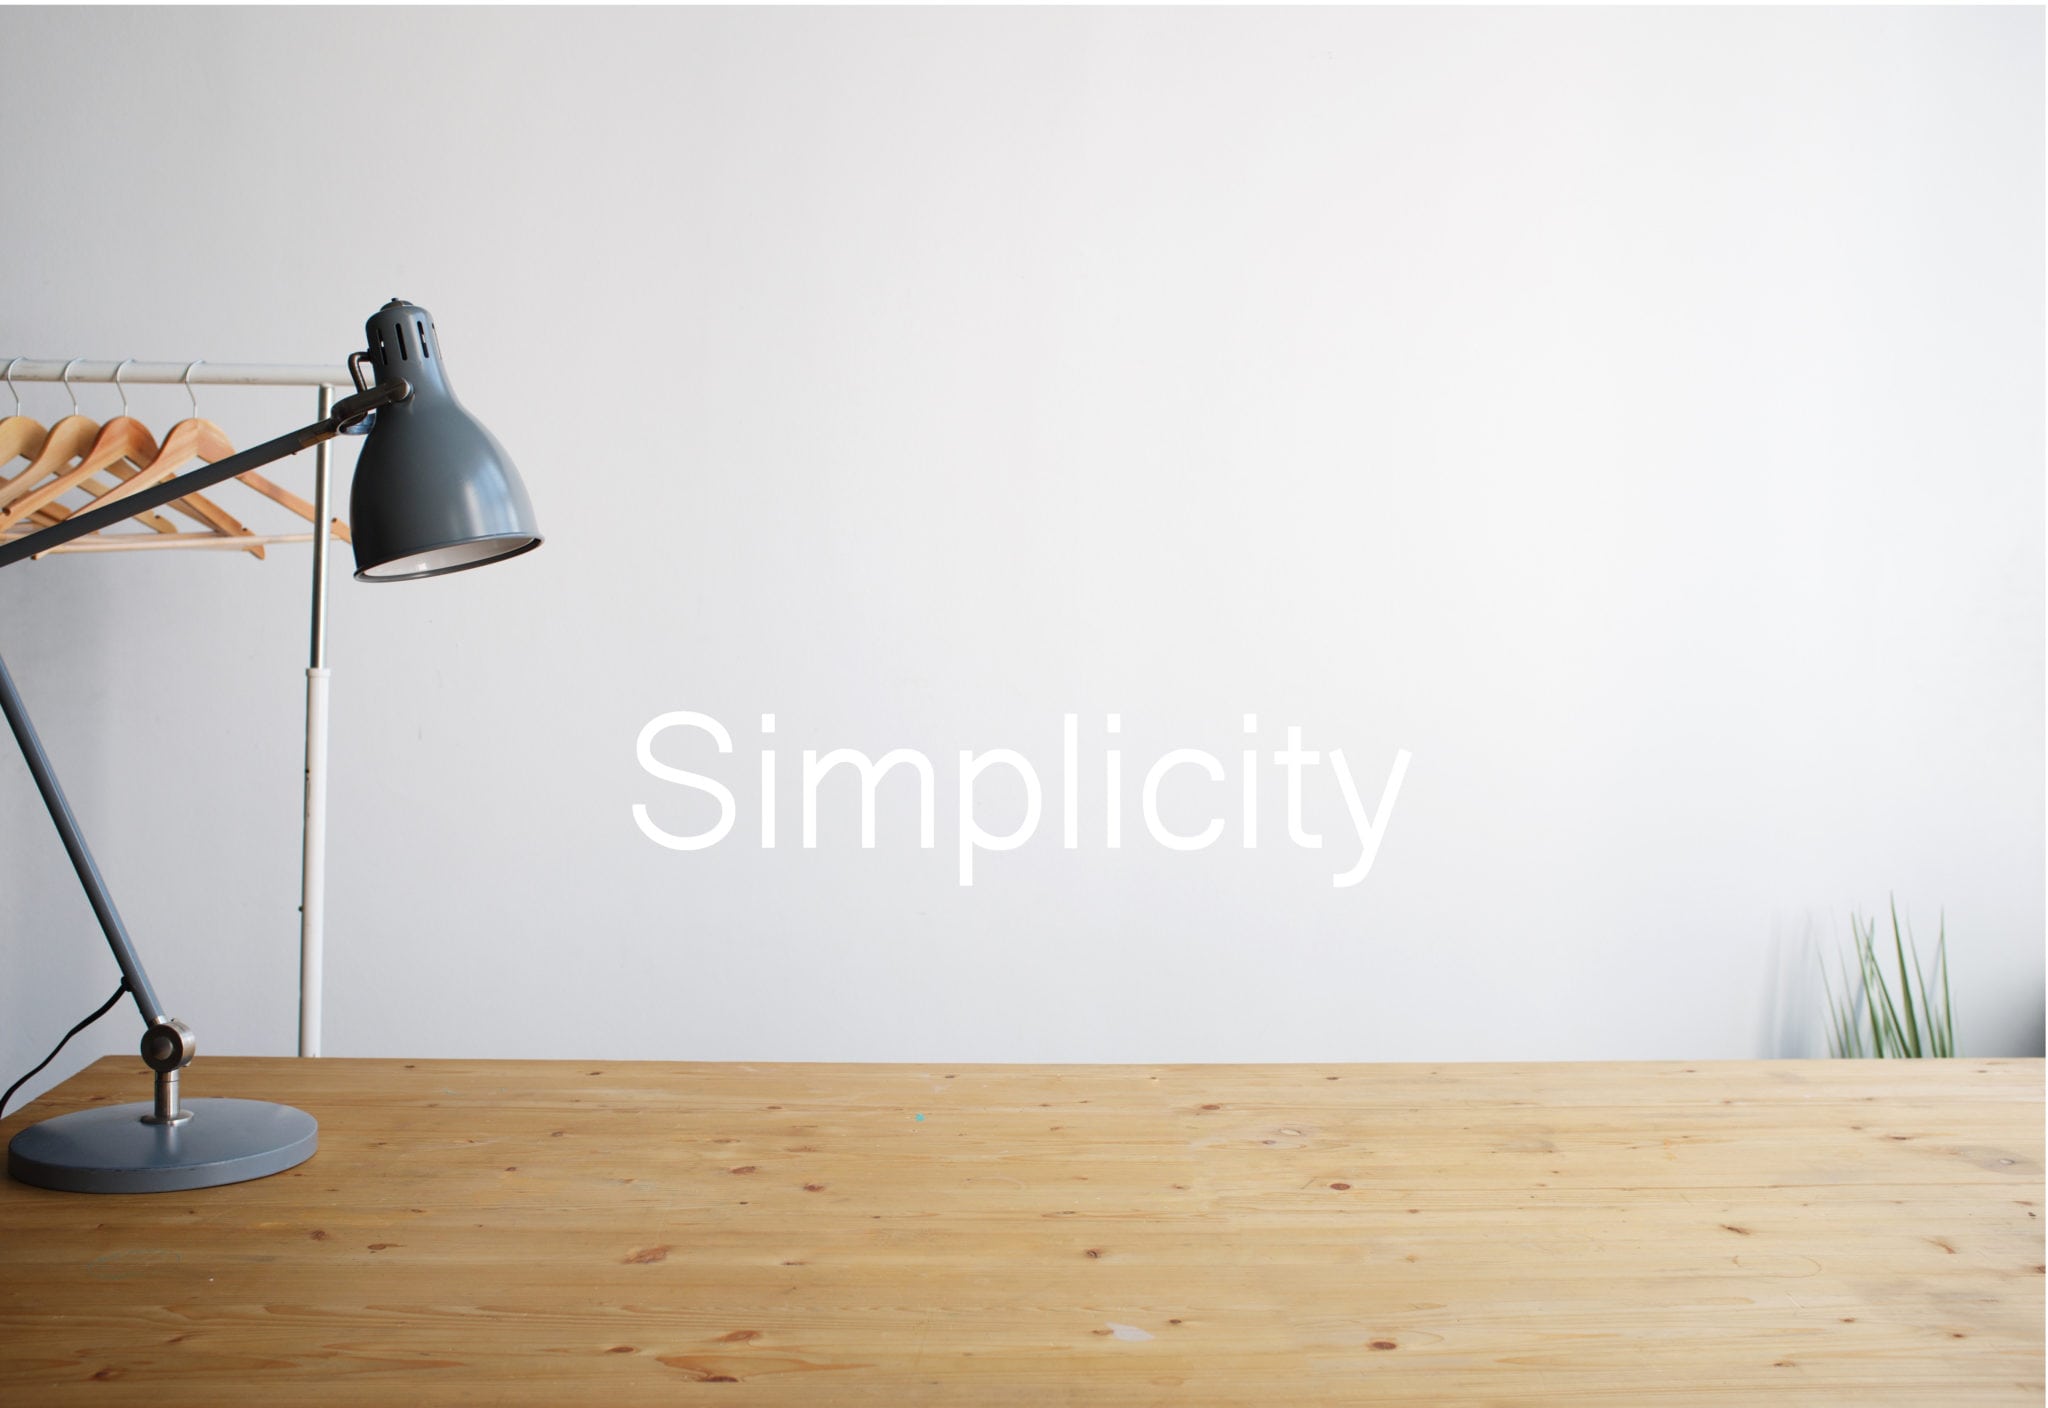 Featured image for “What does it take to make it simple?”